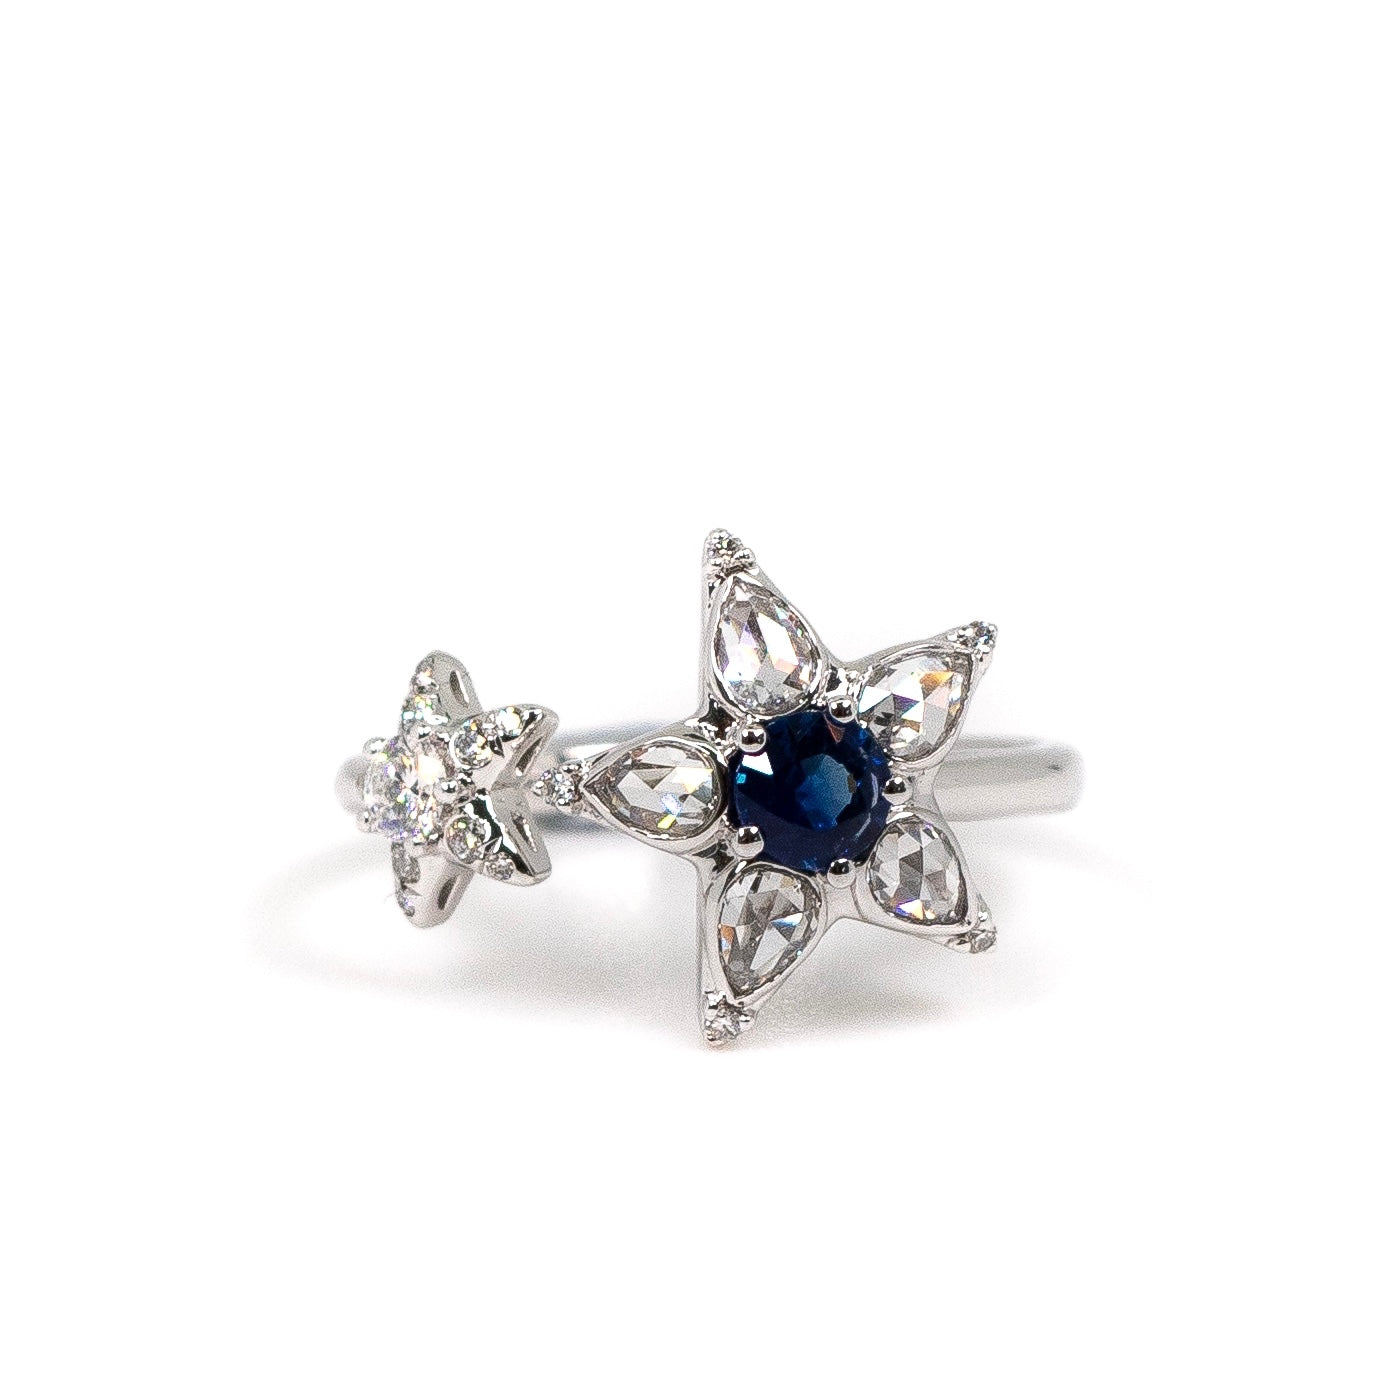 Rose cut diamond and sapphire open star ring